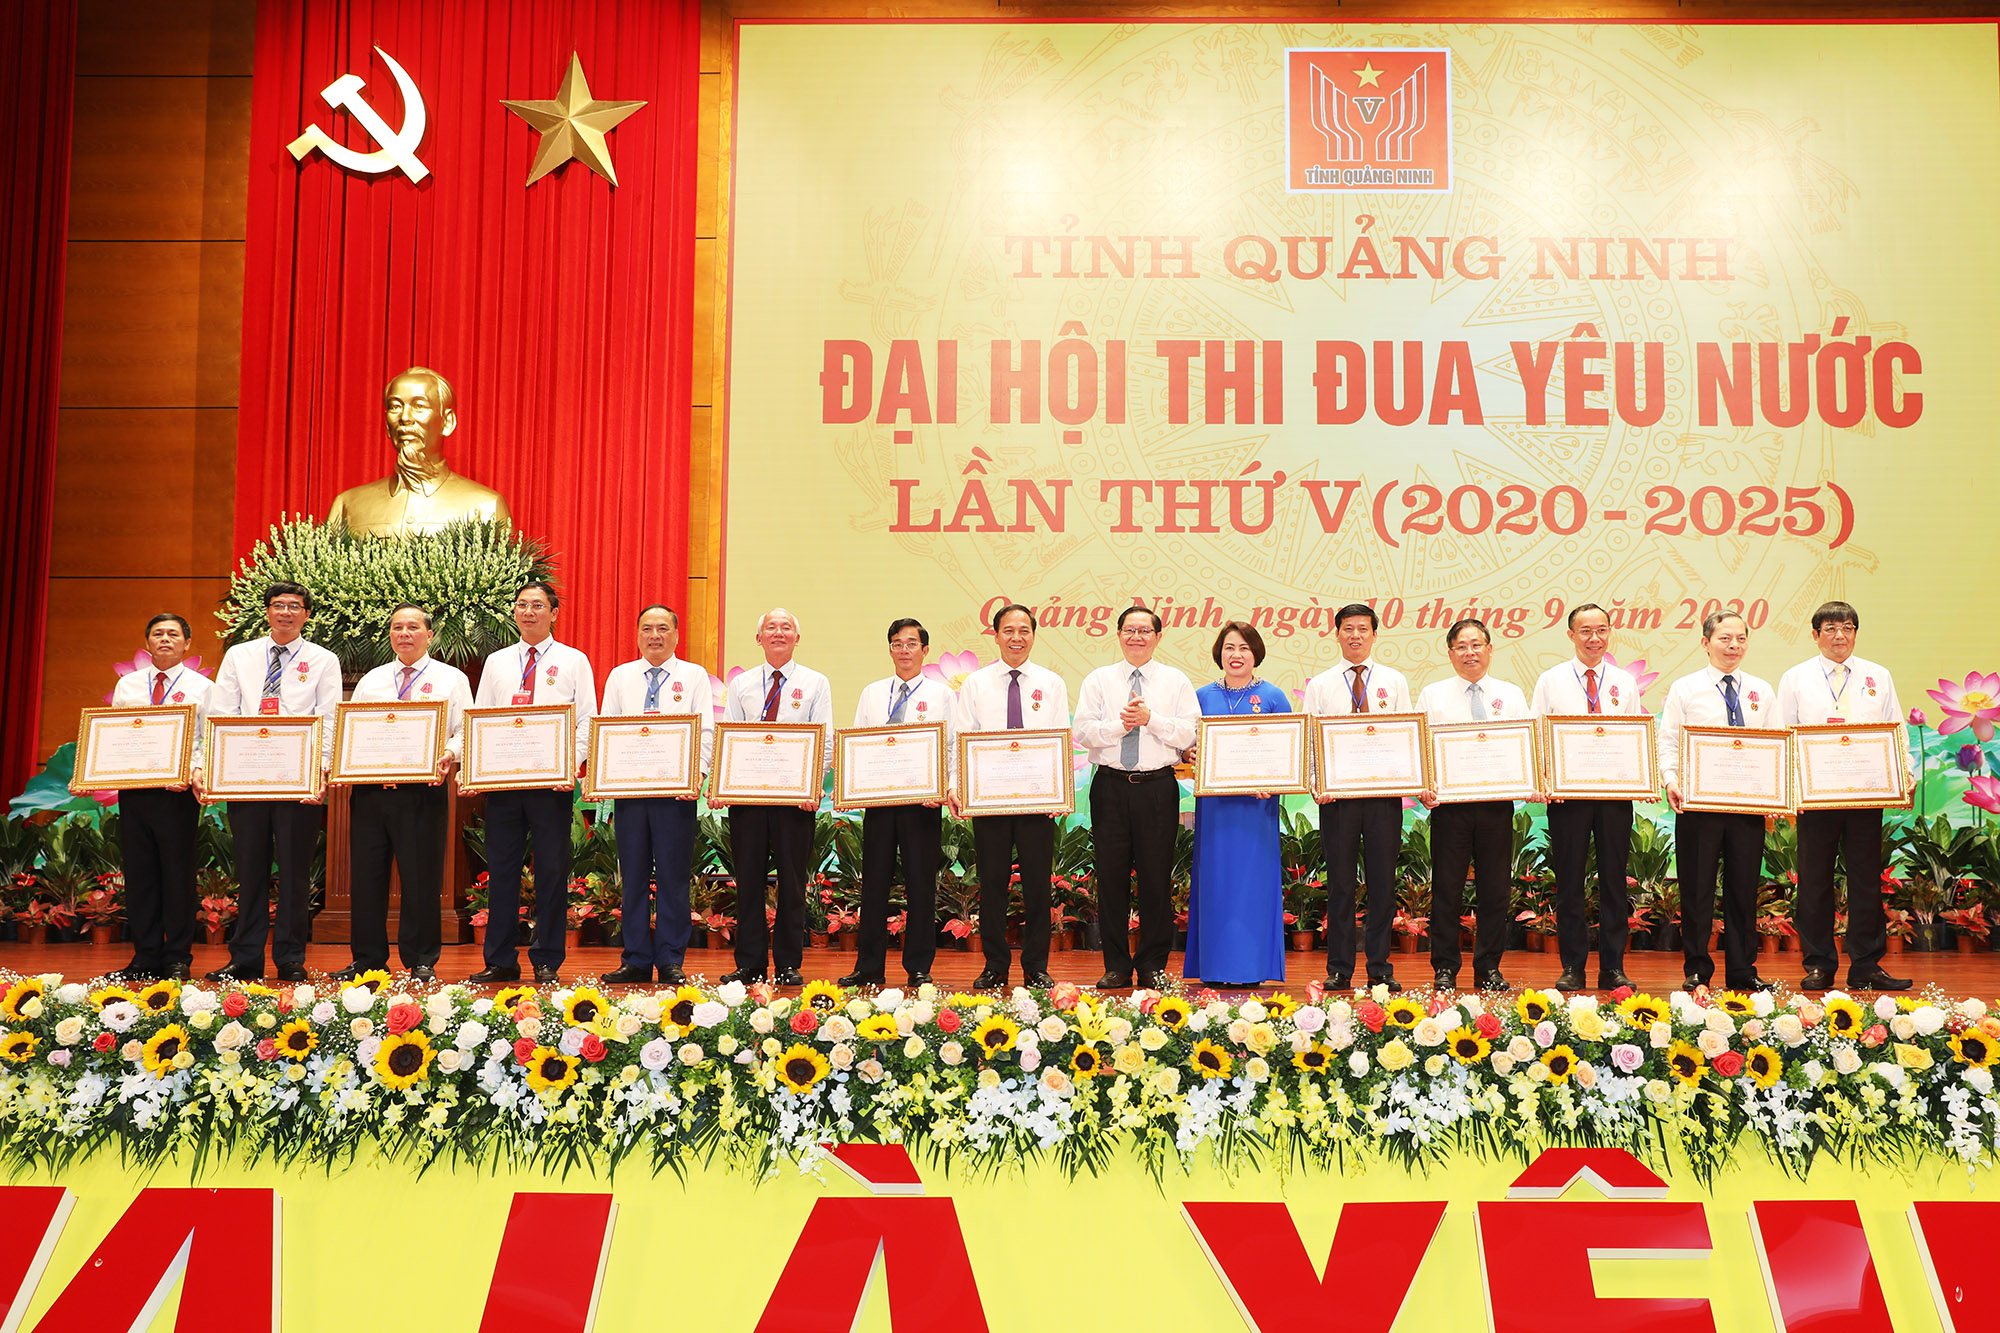 What is the number of member eligible for consideration for awarding Ho Chi Minh Prize at grassroots levels in Vietnam?